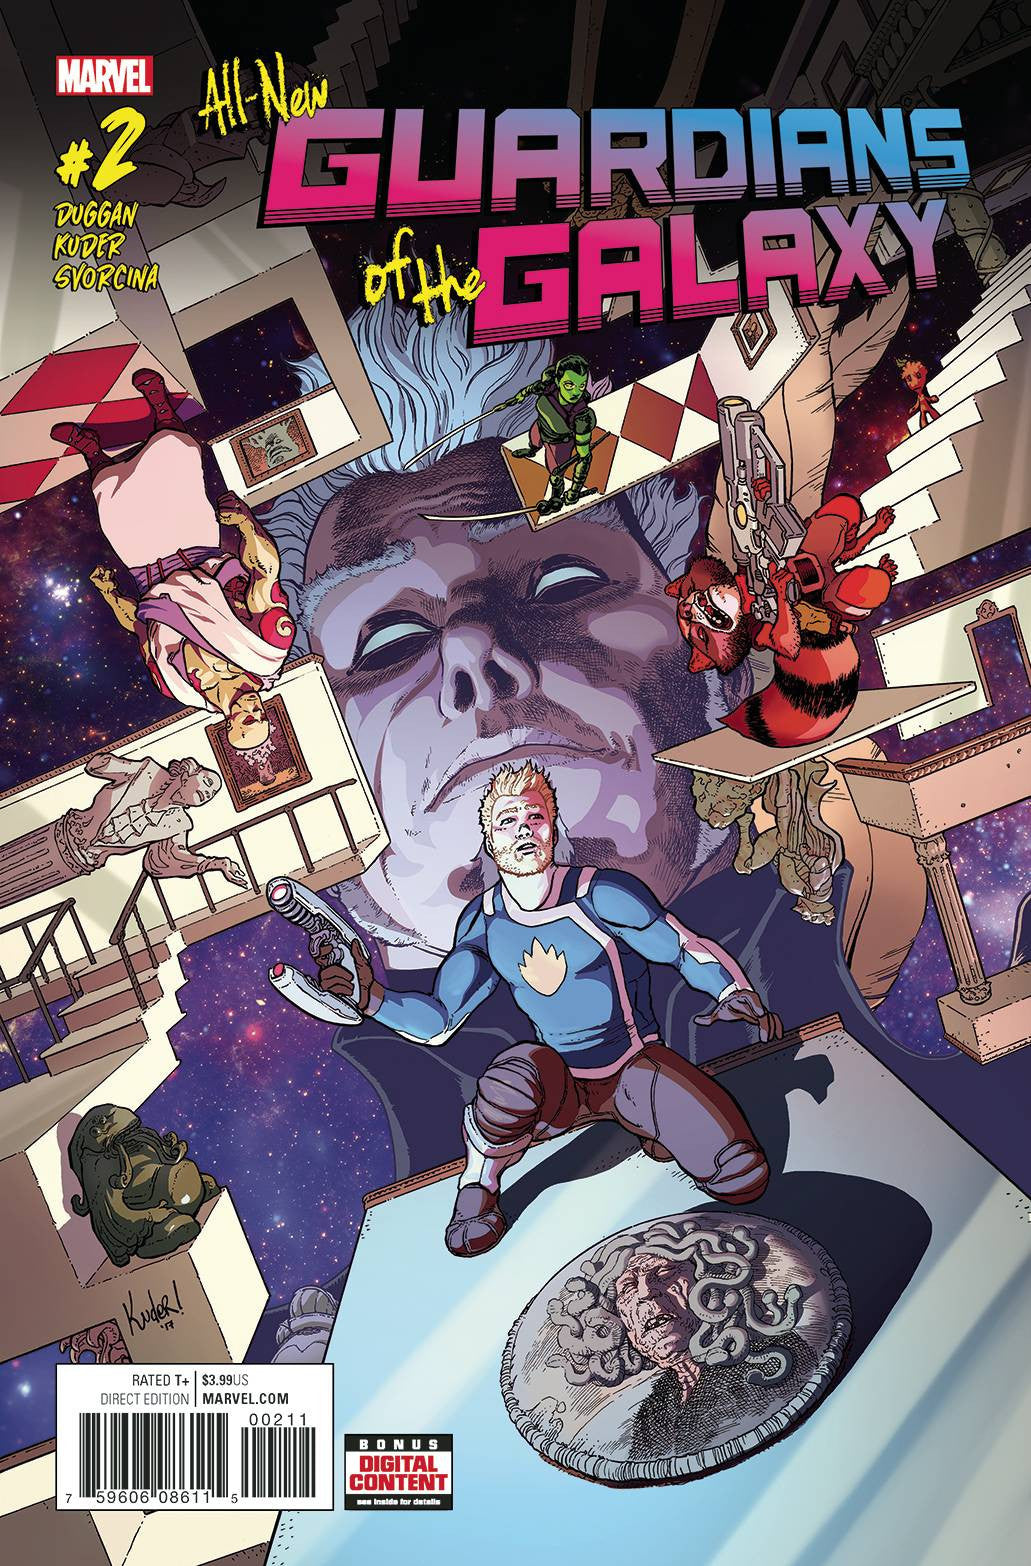 ALL NEW GUARDIANS OF GALAXY #2 COVER